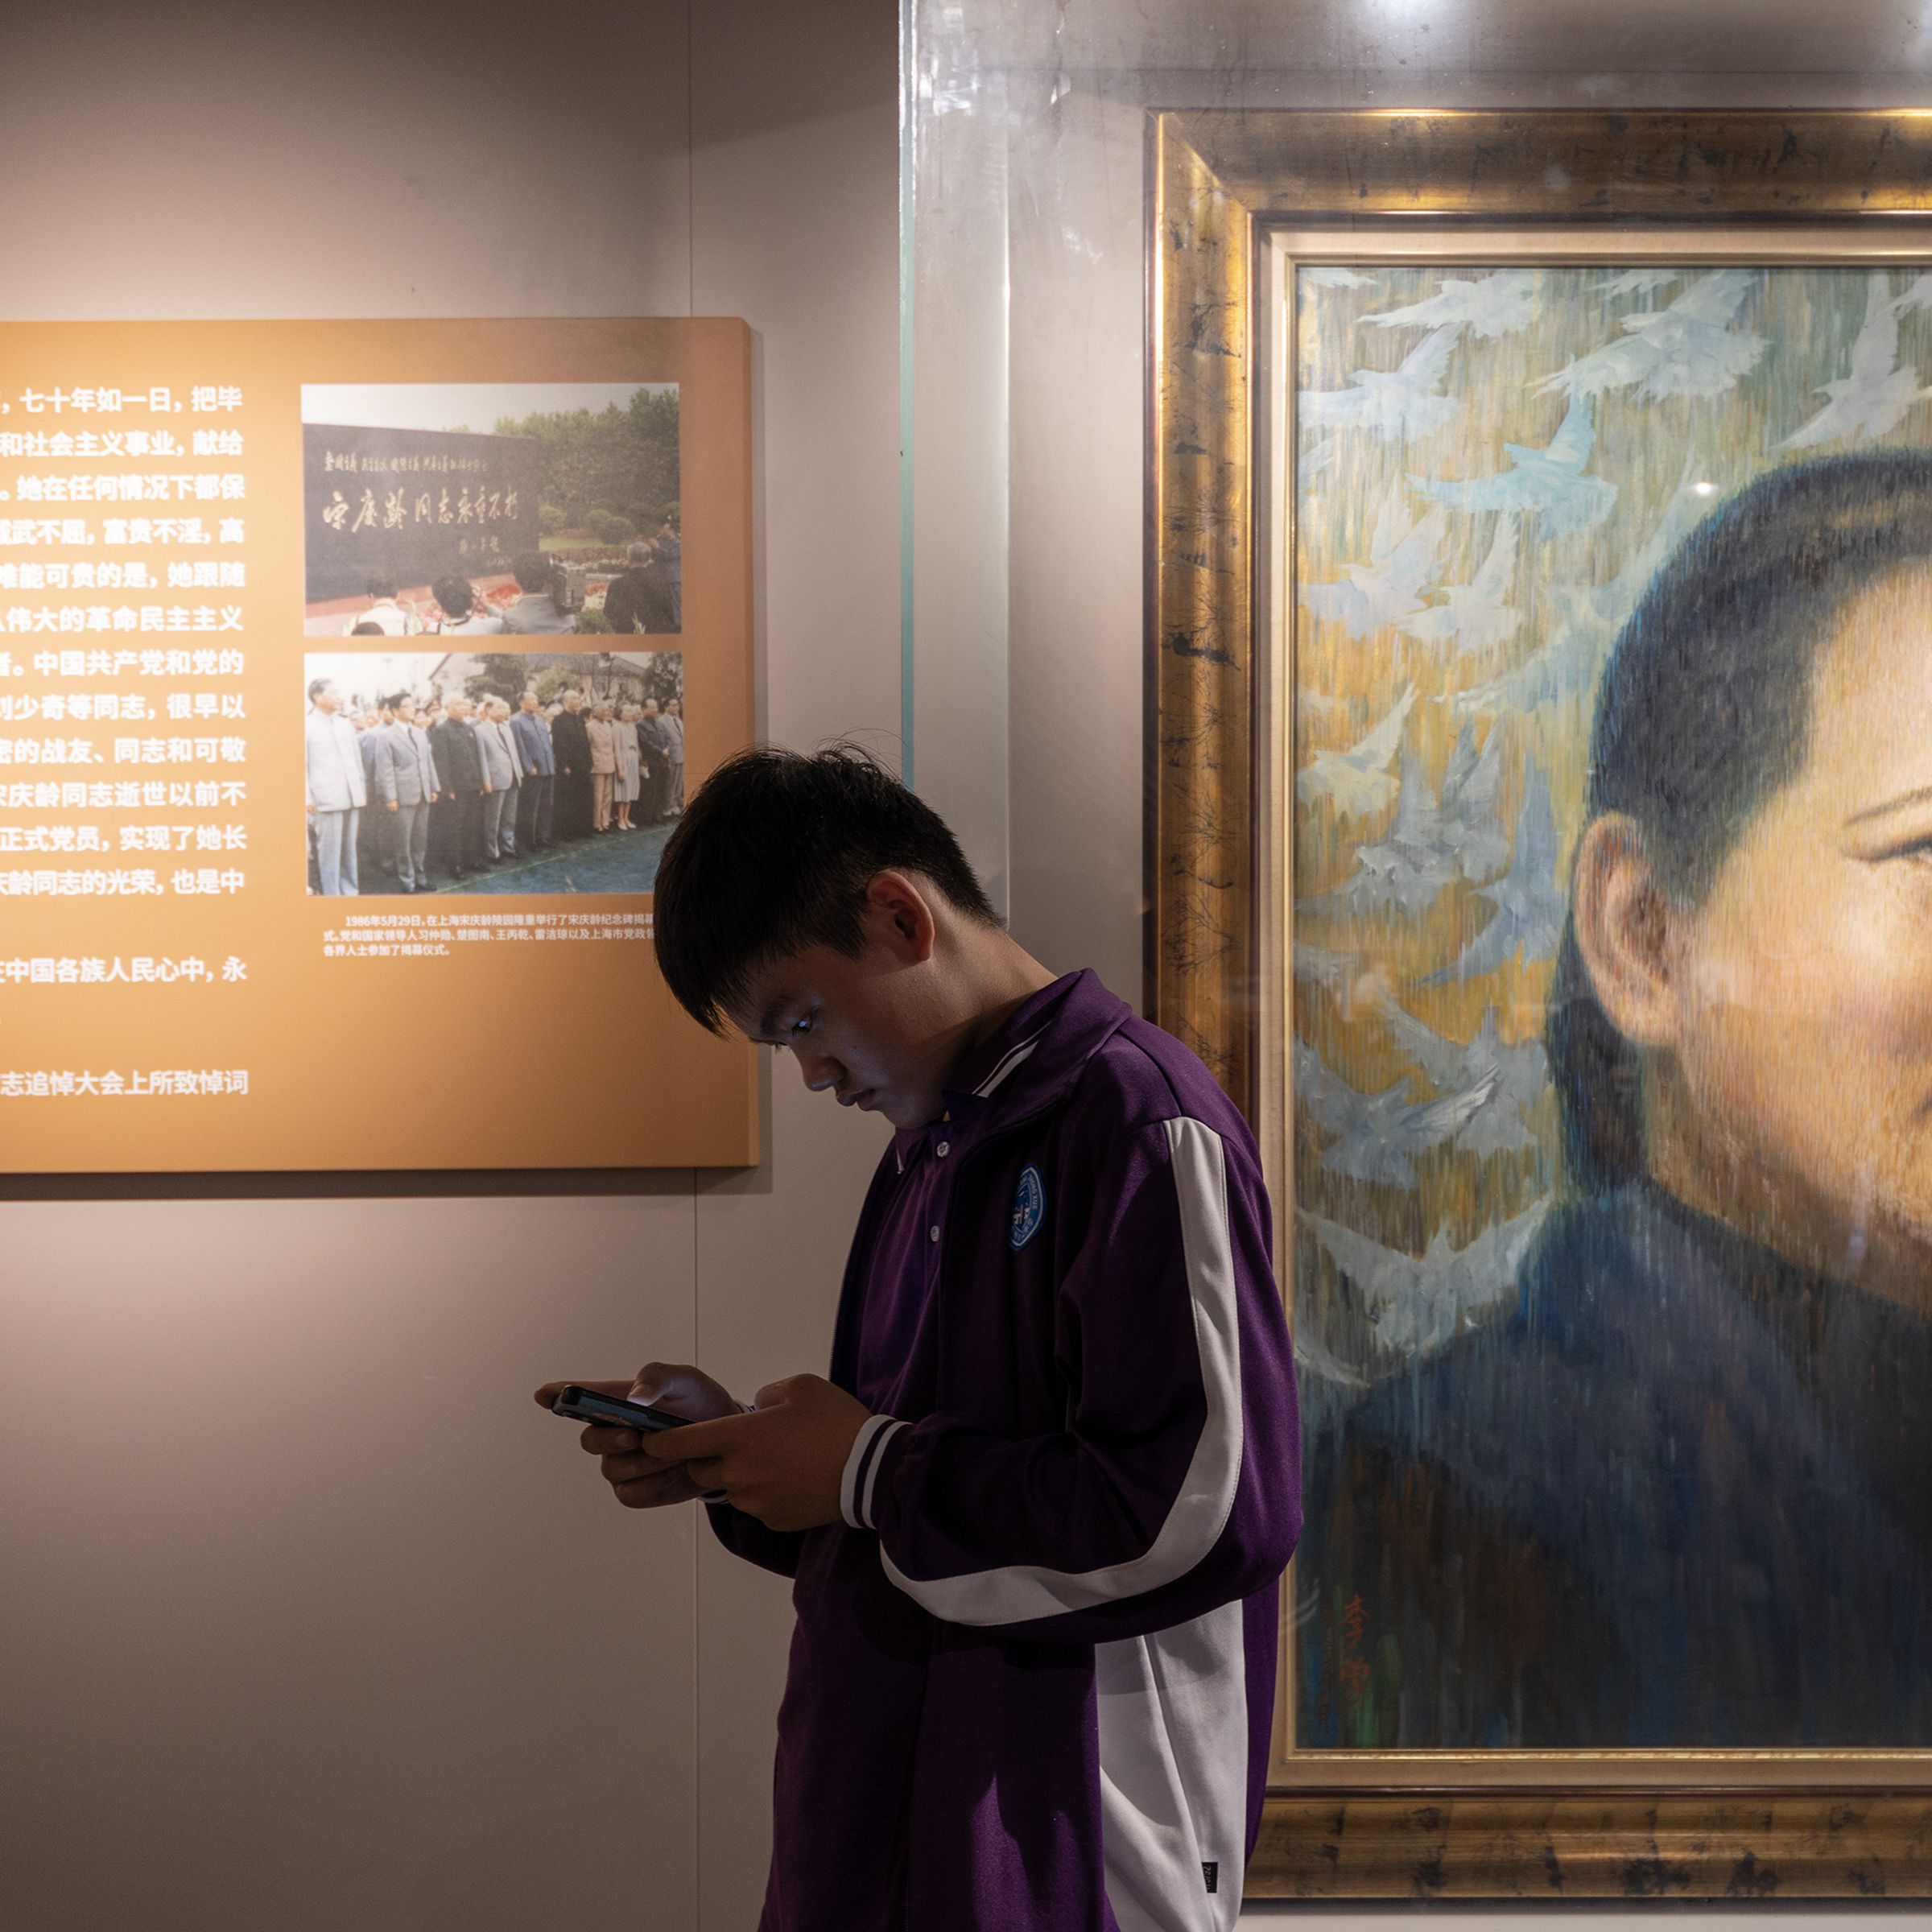 A boy looks at his smart phone by Song Qingling’s portrait painting at Song Qingling’s ancestral residence on May 12th, 2023